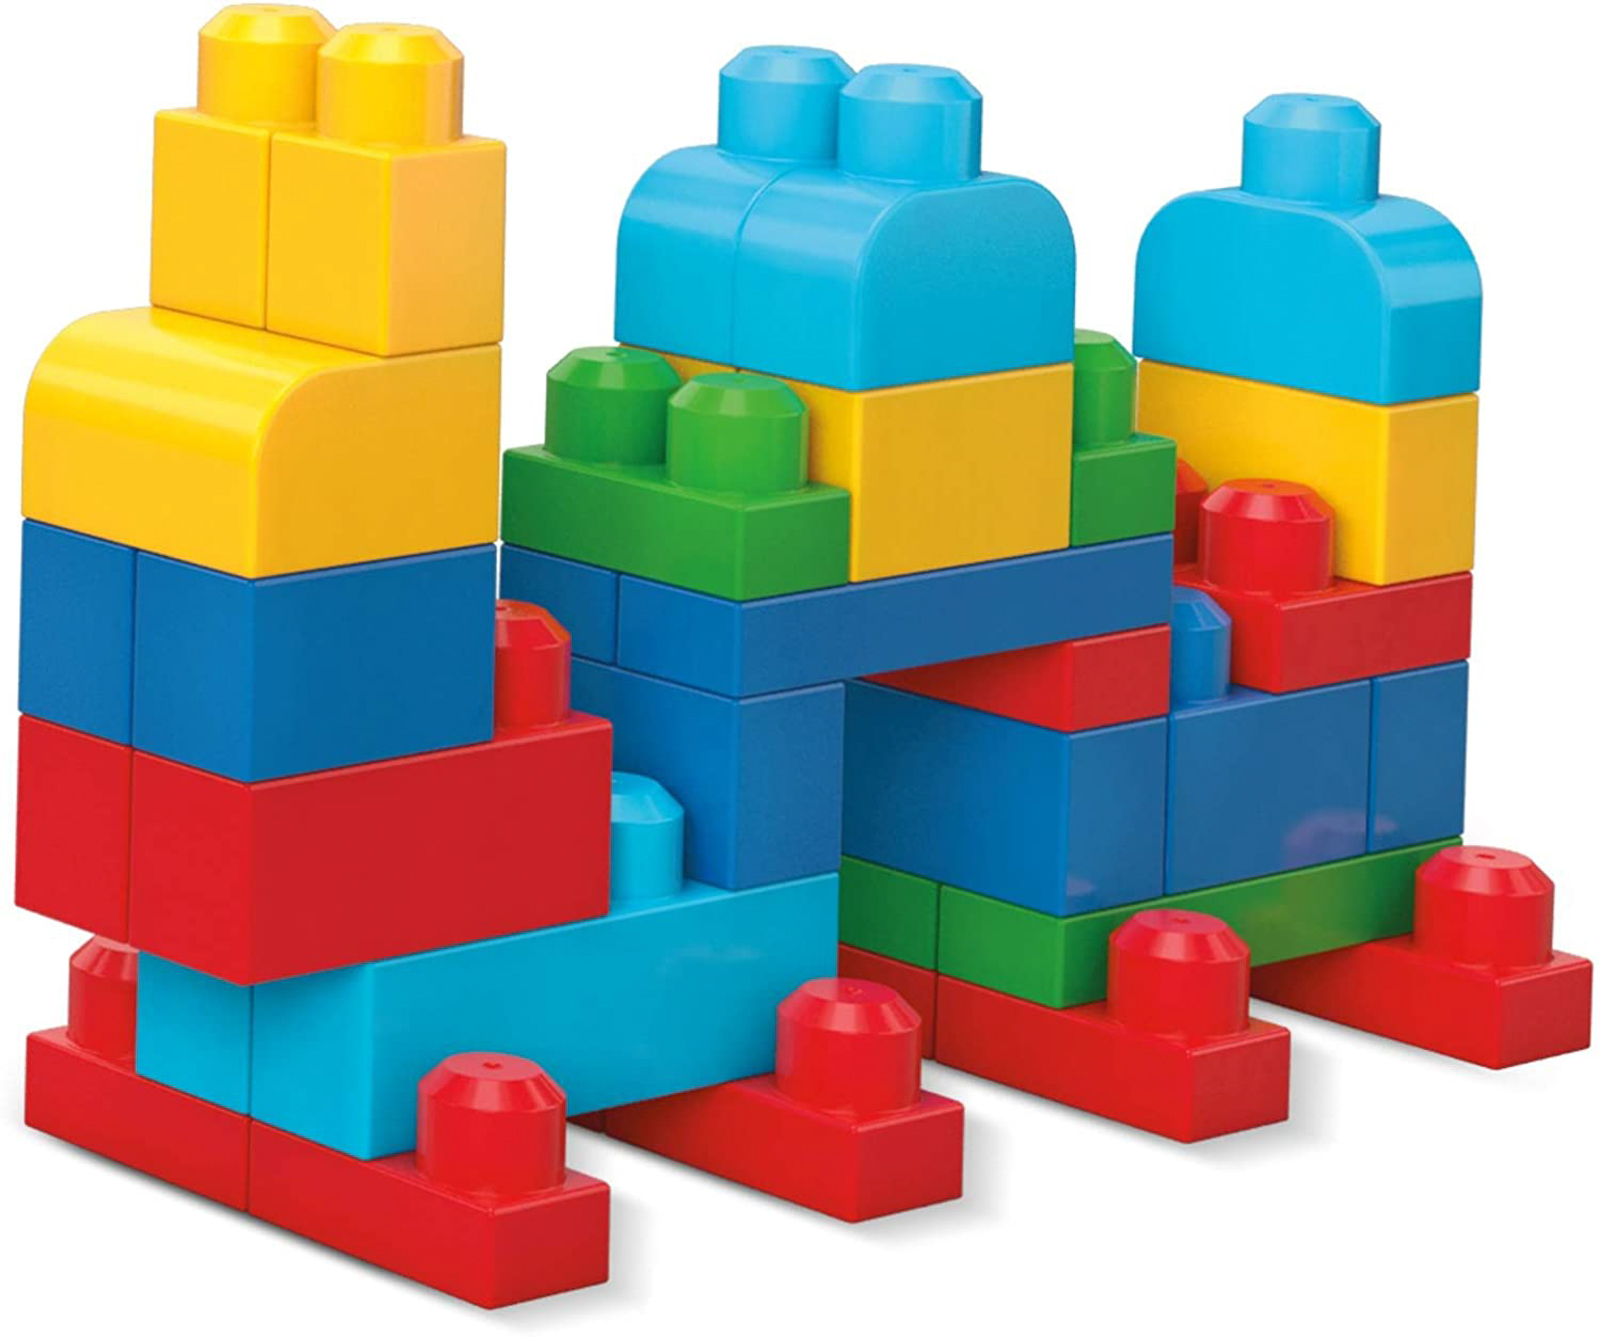 Image contains a Mega Bloks First Builders Deluxe Building Bag